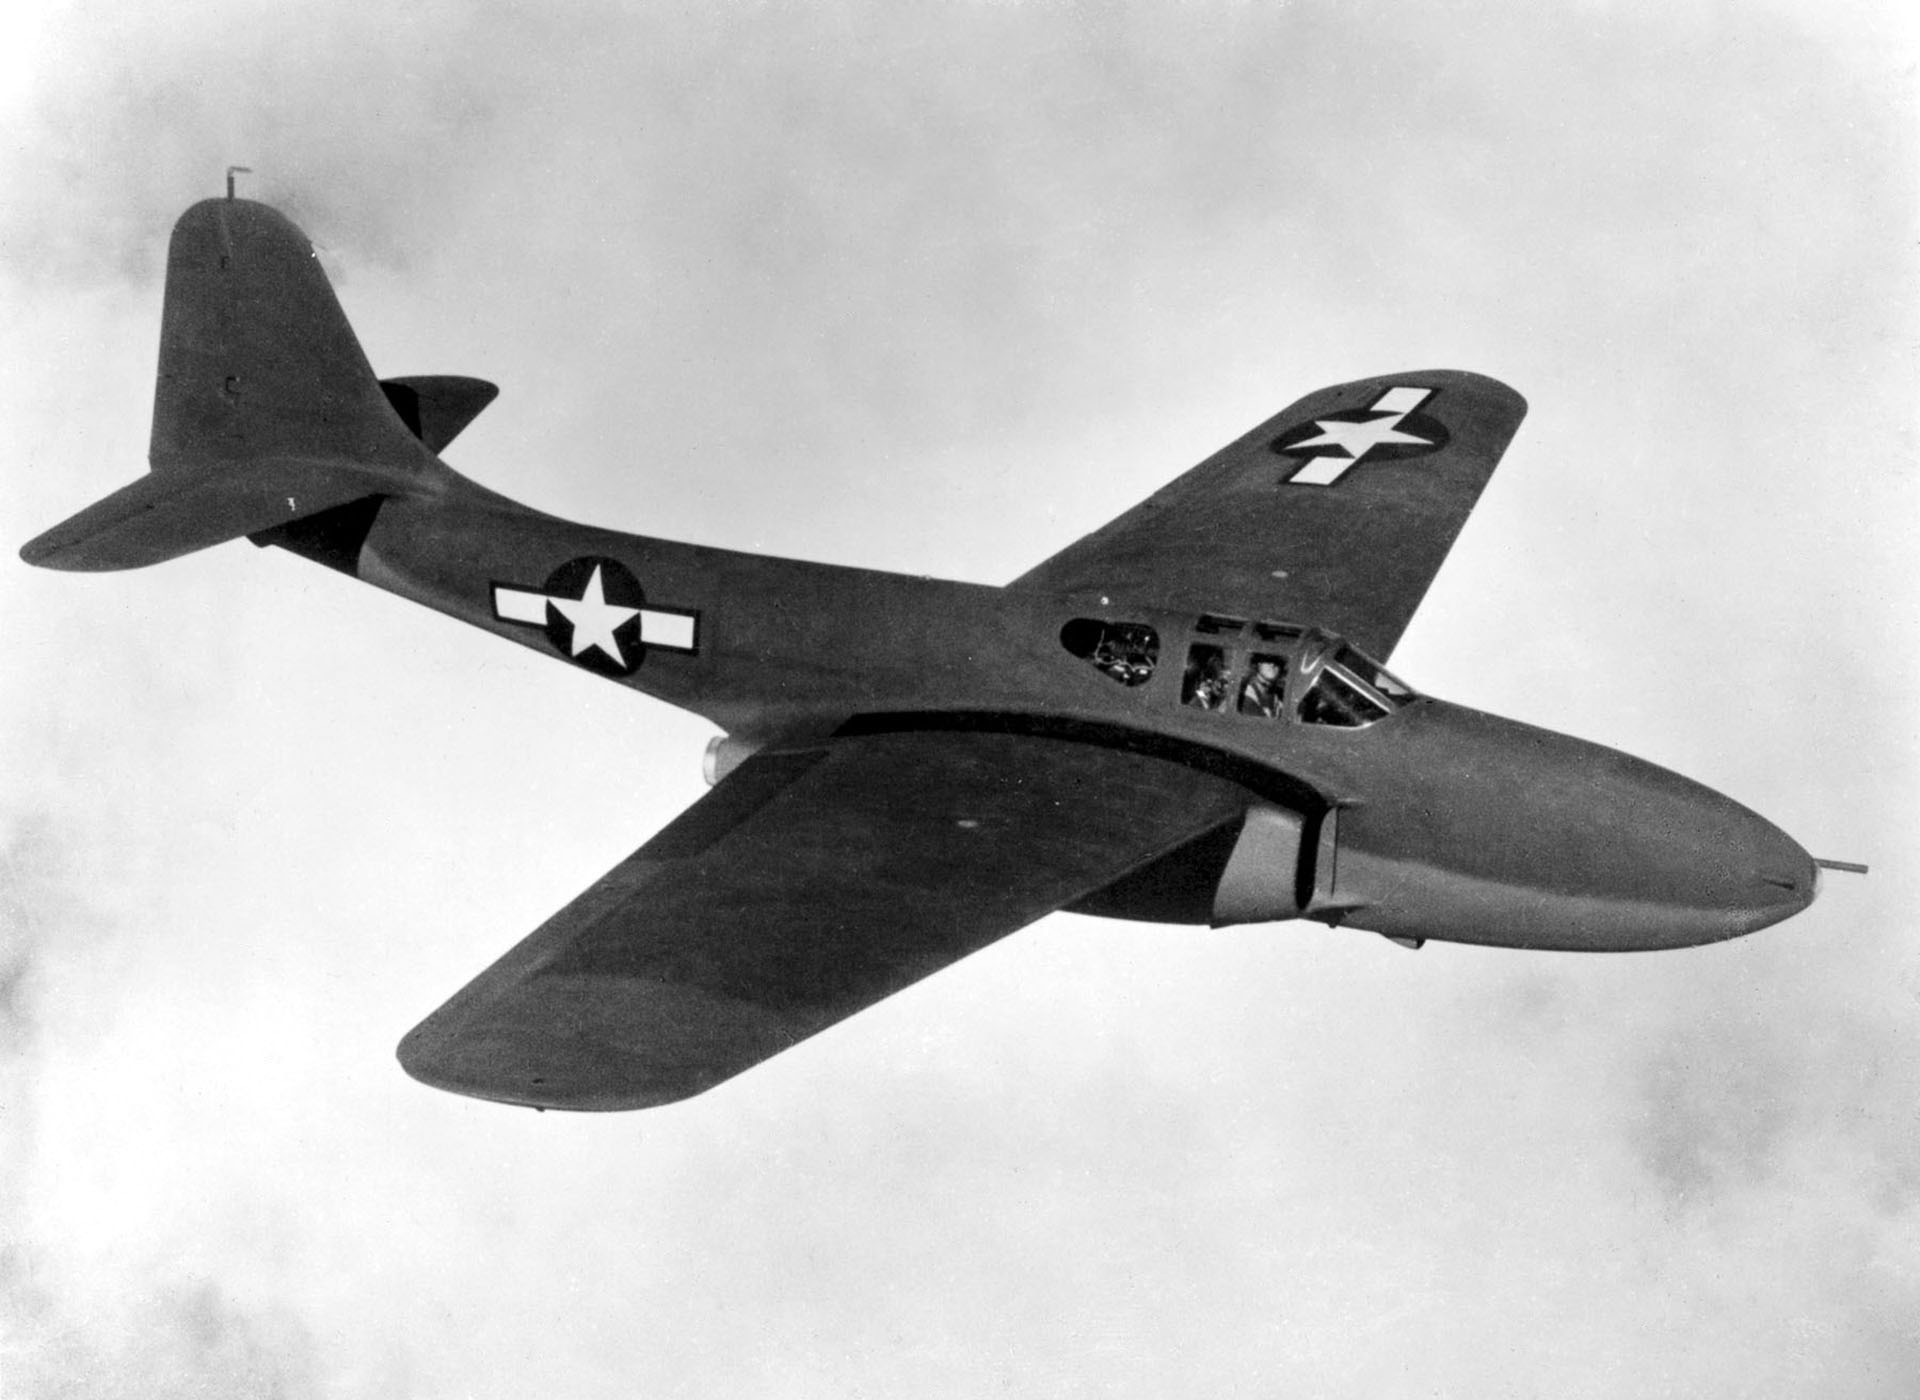 The YP-59A in flight.